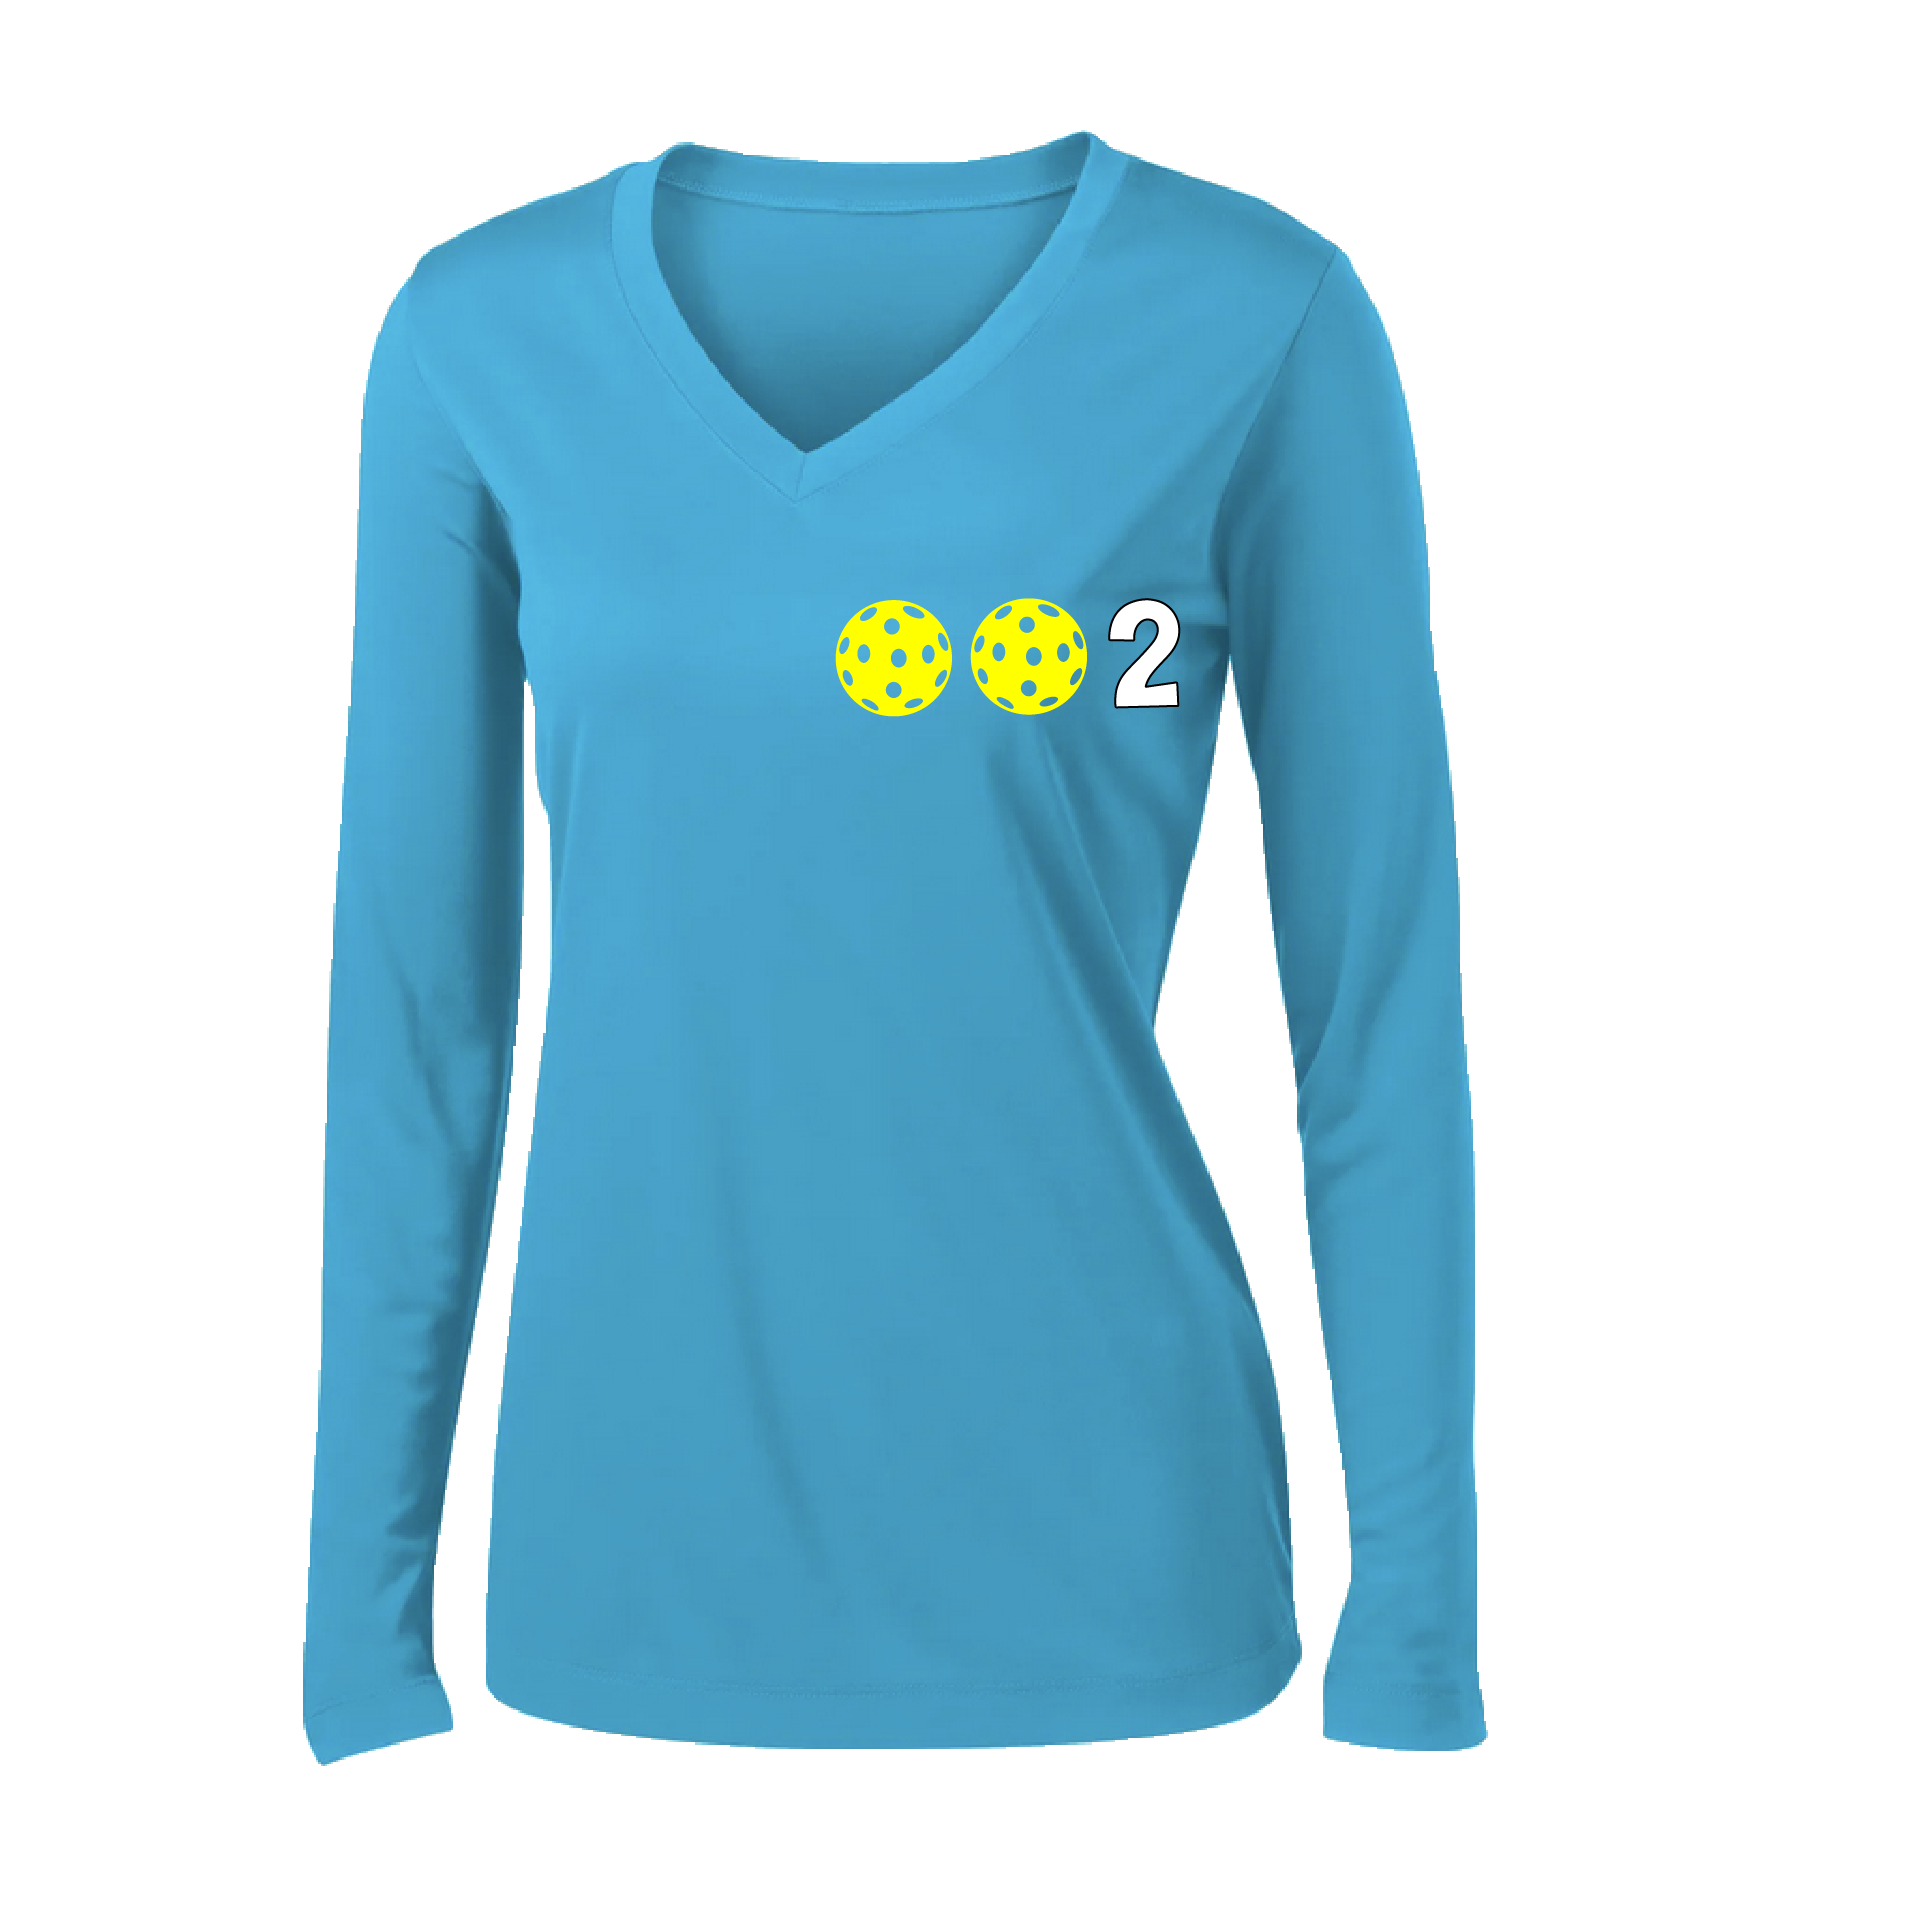 Design: 002 with Customizable Ball Colors (Yellow, Pink, White)  Women's Style:  Long-Sleeve V-Neck  Shirts are lightweight, roomy and highly breathable. These moisture-wicking shirts are designed for athletic performance. They feature PosiCharge technology to lock in color and prevent logos from fading. Removable tag and set-in sleeves for comfo